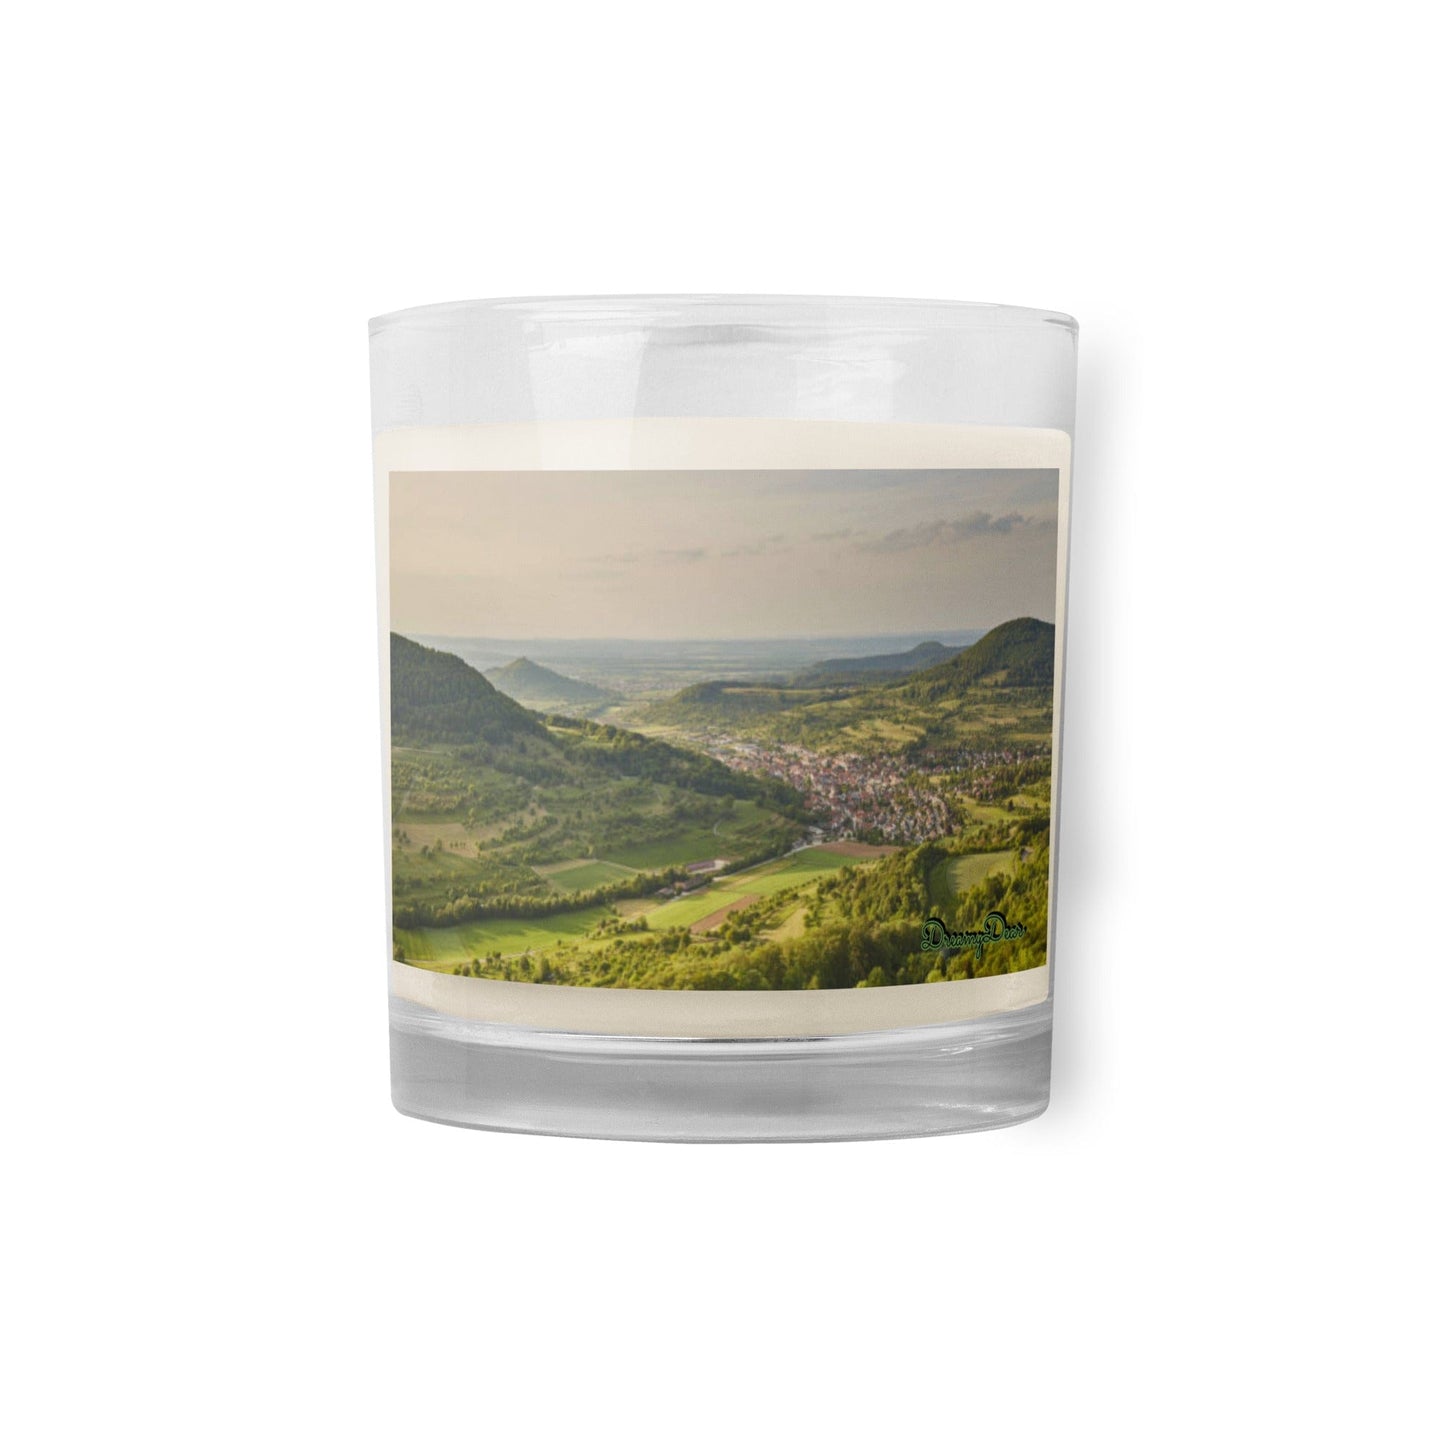 "Mountainous" soy wax candle